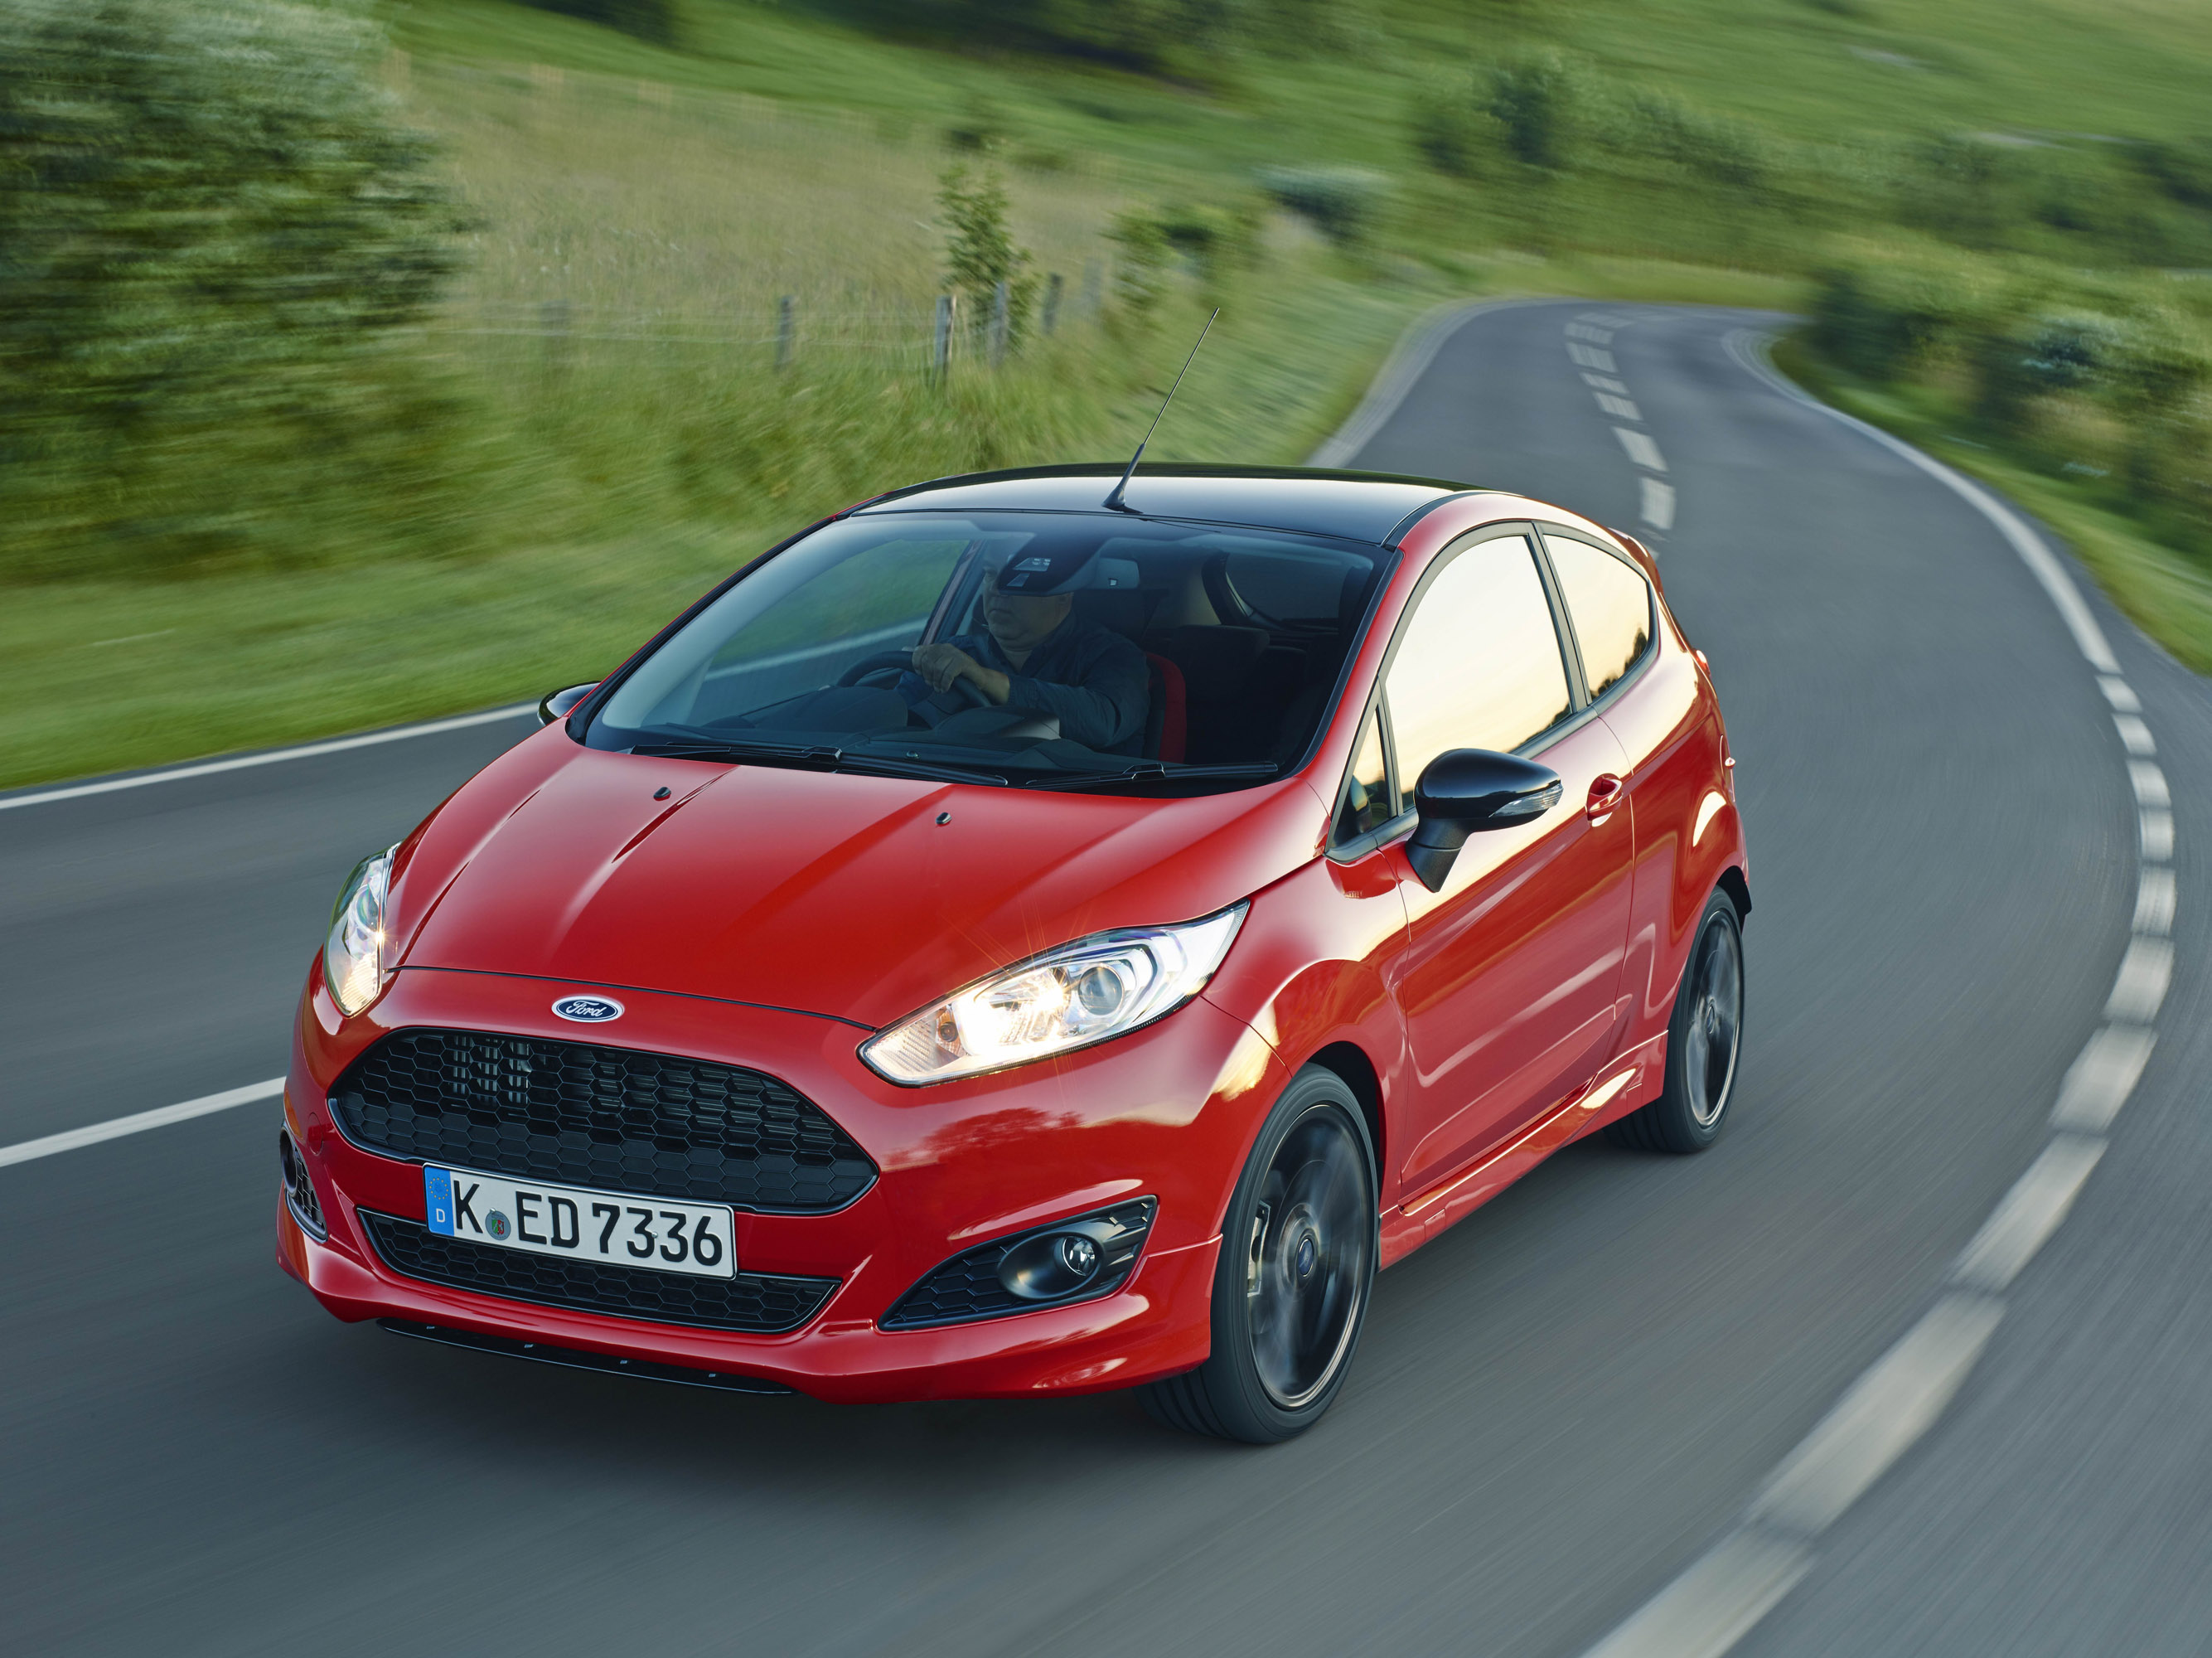 Ford Demonstrates New Models at Goodwood Festival of Speed